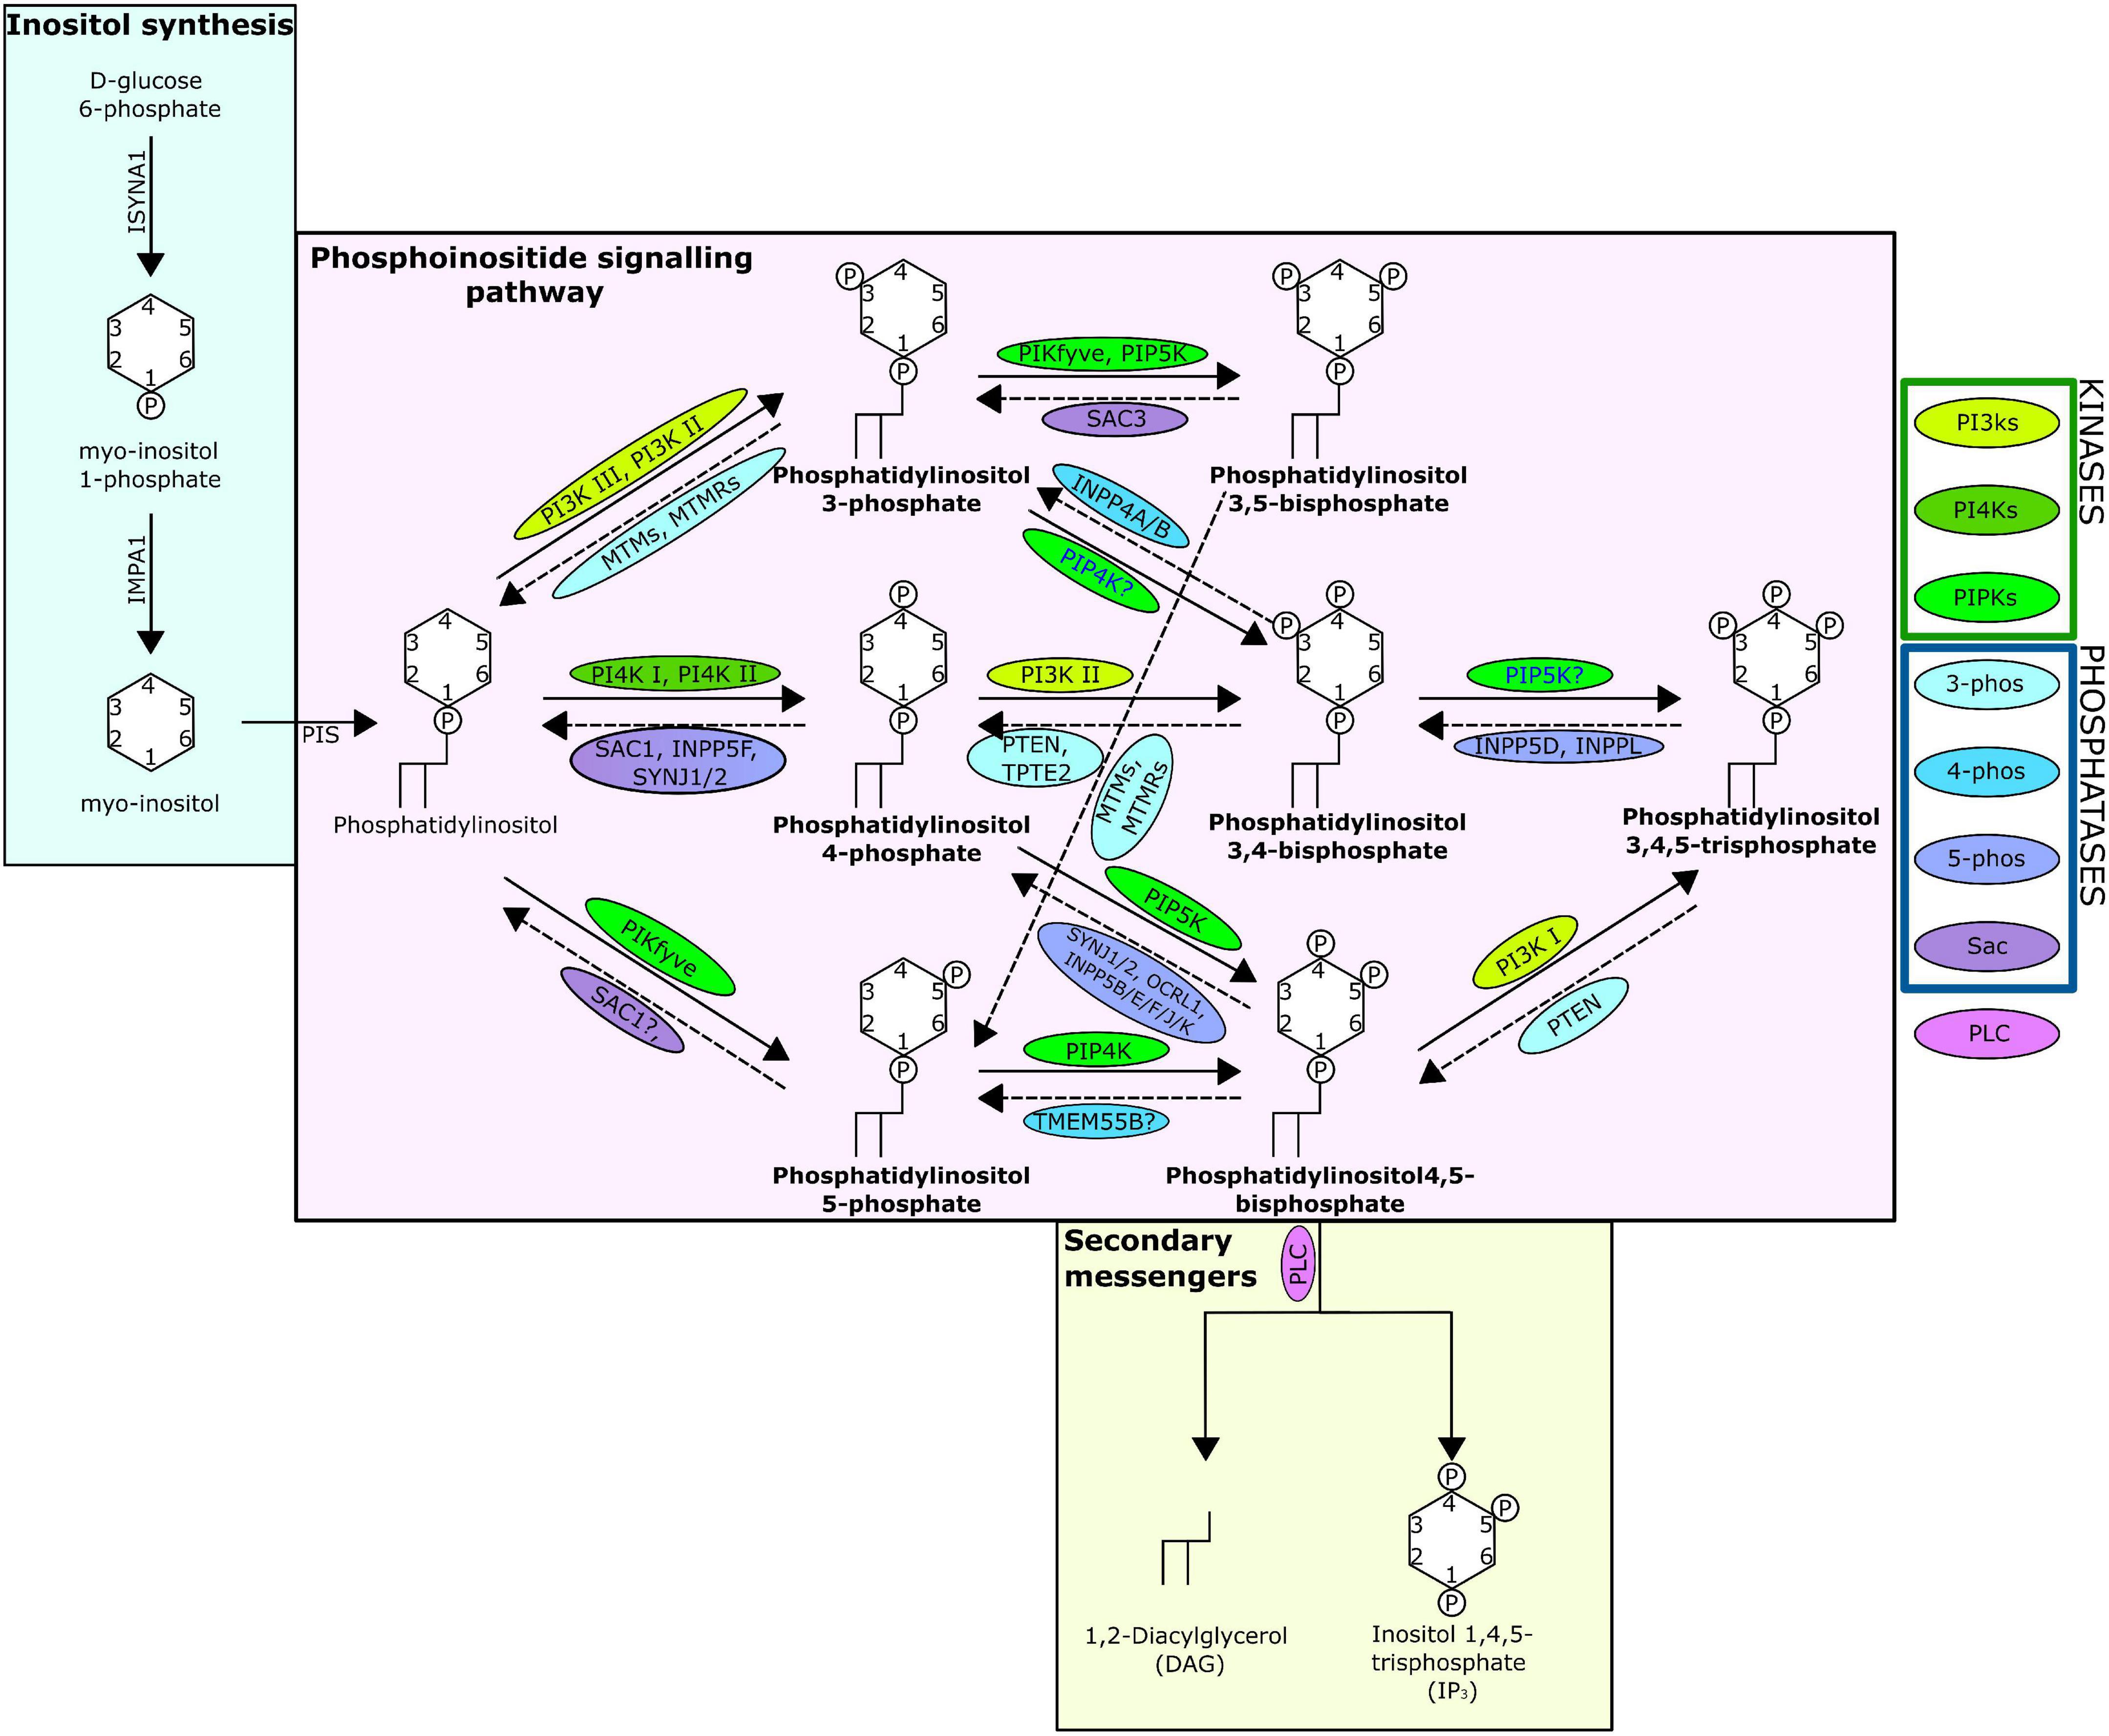 Genomic conservation and putative downstream functionality of the phosphatidylinositol signalling pathway in the cnidarian-dinoflagellate symbiosis